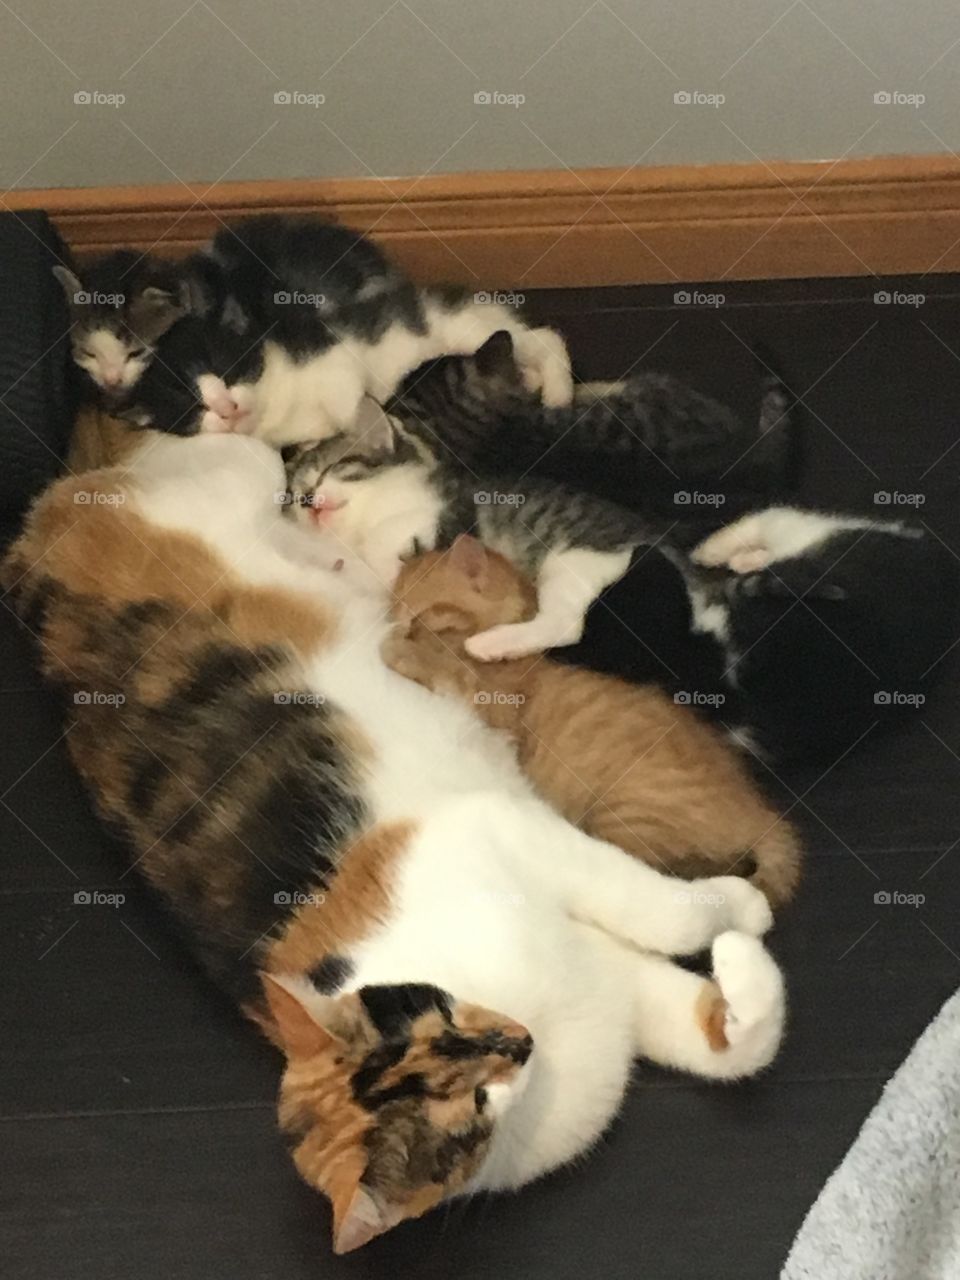 A happy family of kittens enjoying some snuggles.